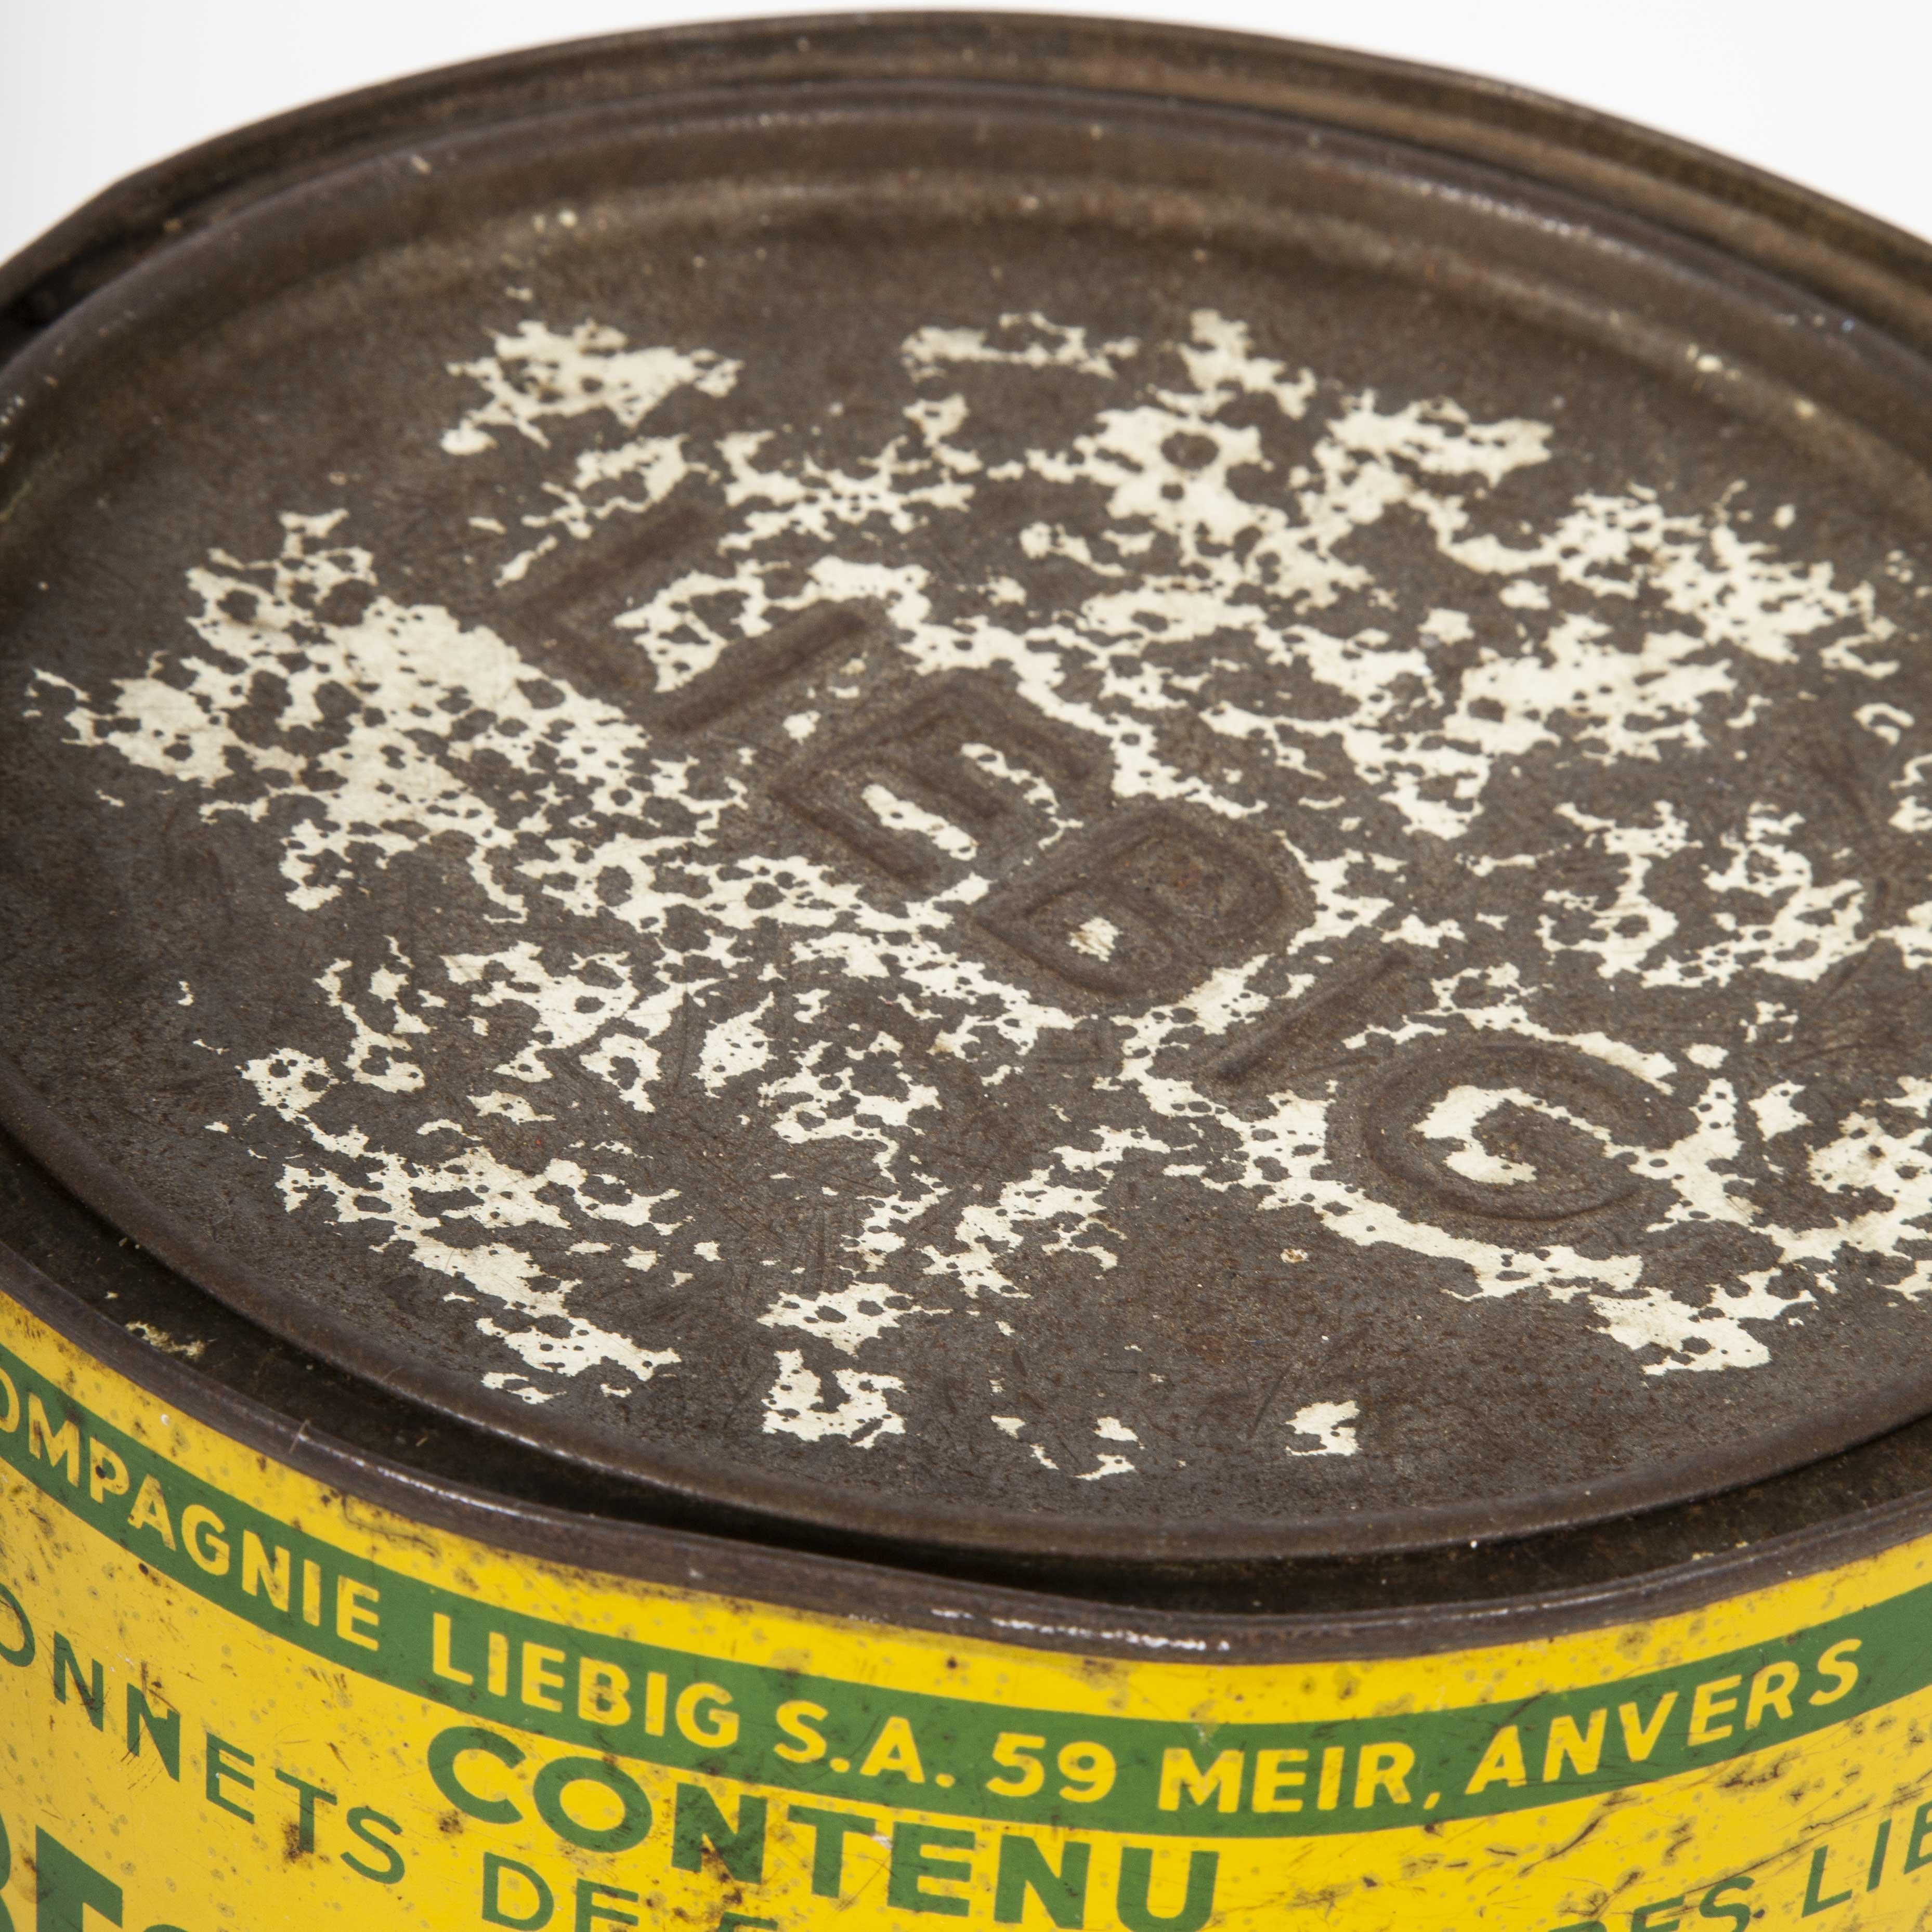 1950s large Liebig Bouillon tin

1950s large Liebig Bouillon tin. In the mid-19th century, German chemist Justus von Liebig developed a meat extract which developed in the well known Belgian Liebig Bouillon brand.

Workshop report:

Our